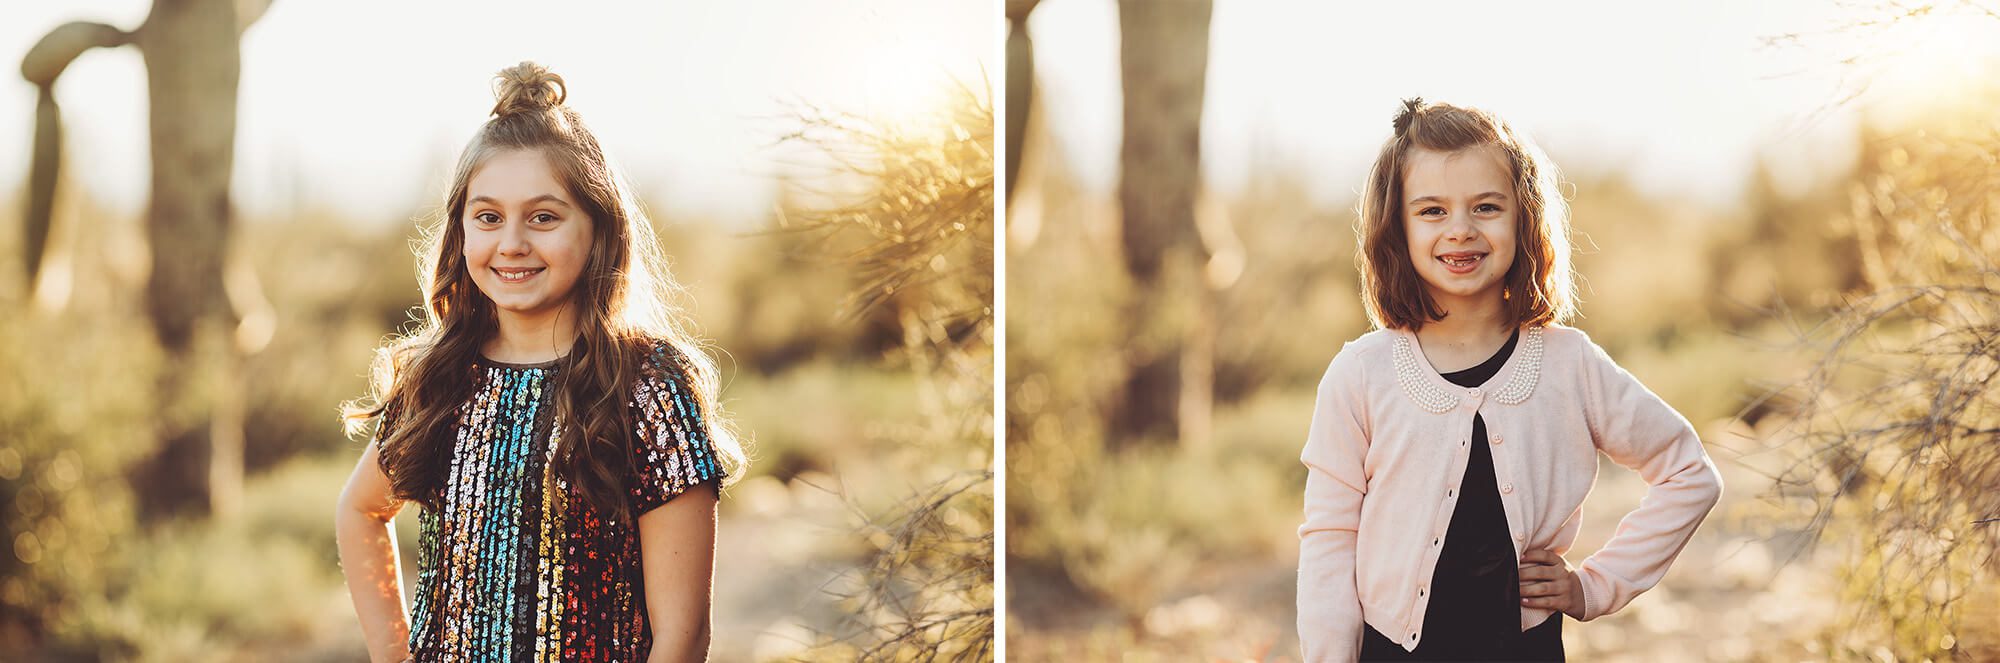 The Gunter daughters looking beautiful and sweet against the desert backdrop during their family photo session with Belle Vie Photography in Tucson